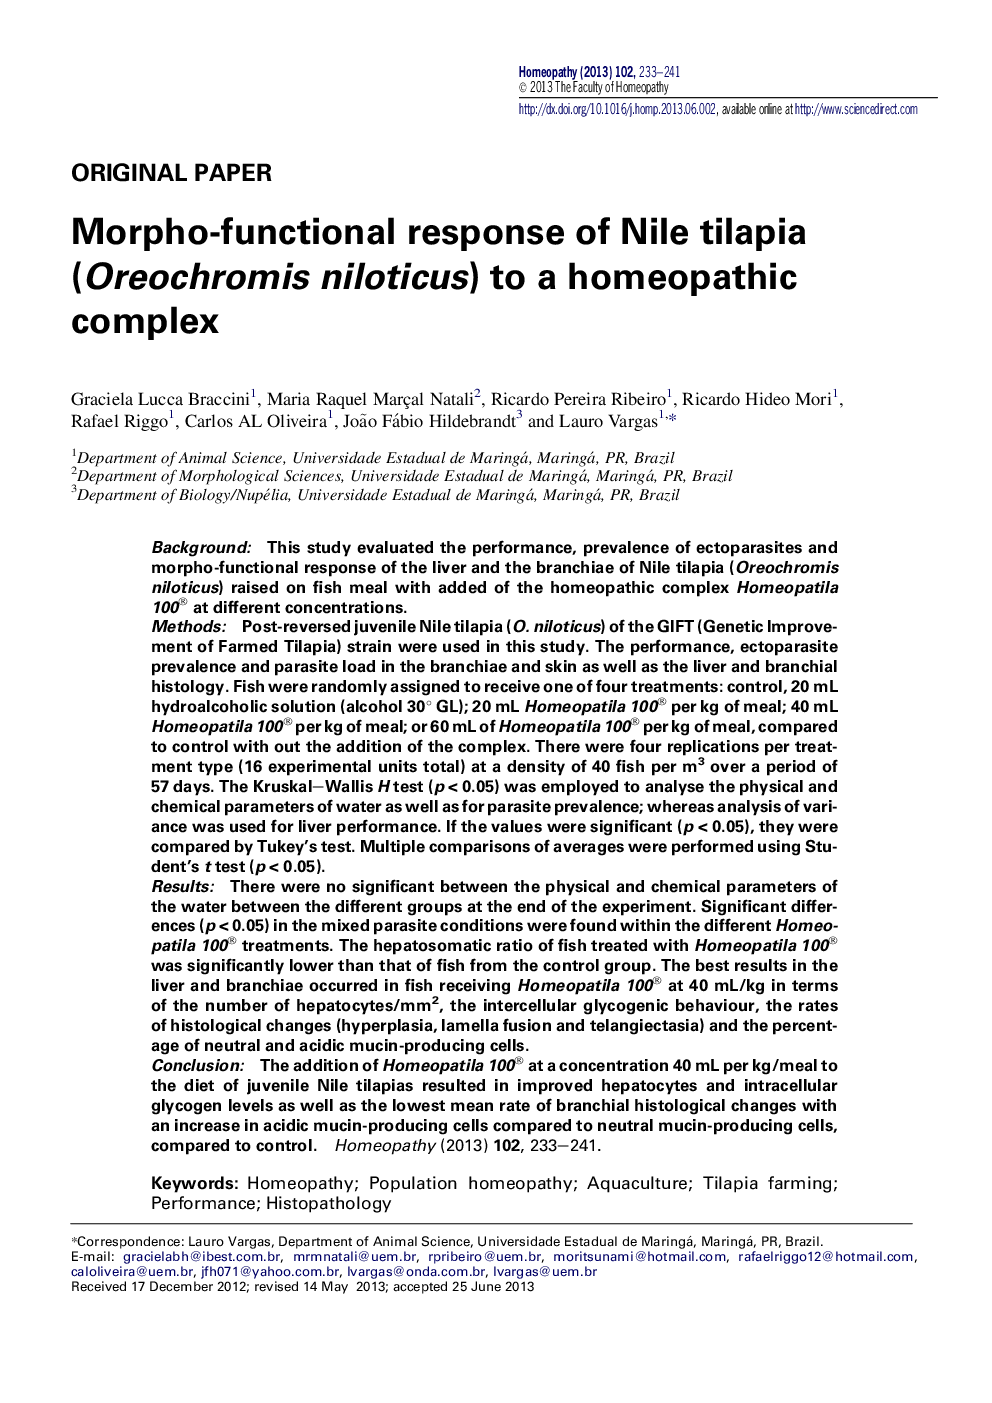 Morpho-functional response of Nile tilapia (Oreochromis niloticus) to a homeopathic complex